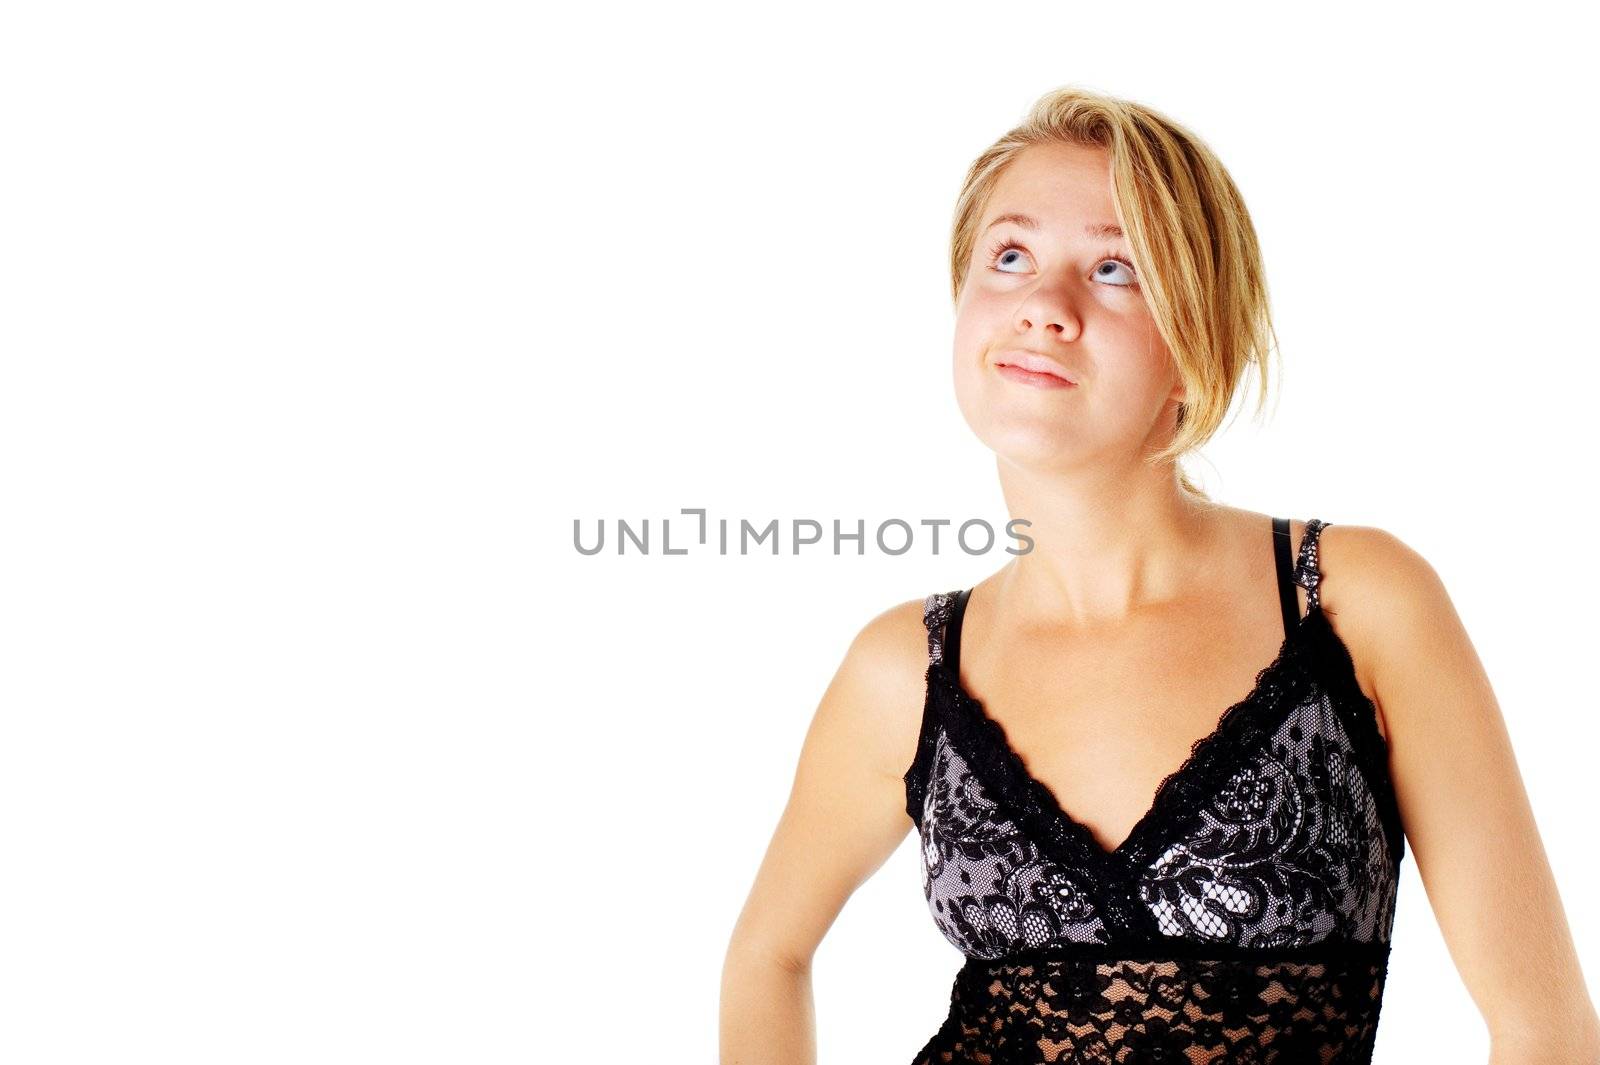 Young woman in a dress posing against a white background.